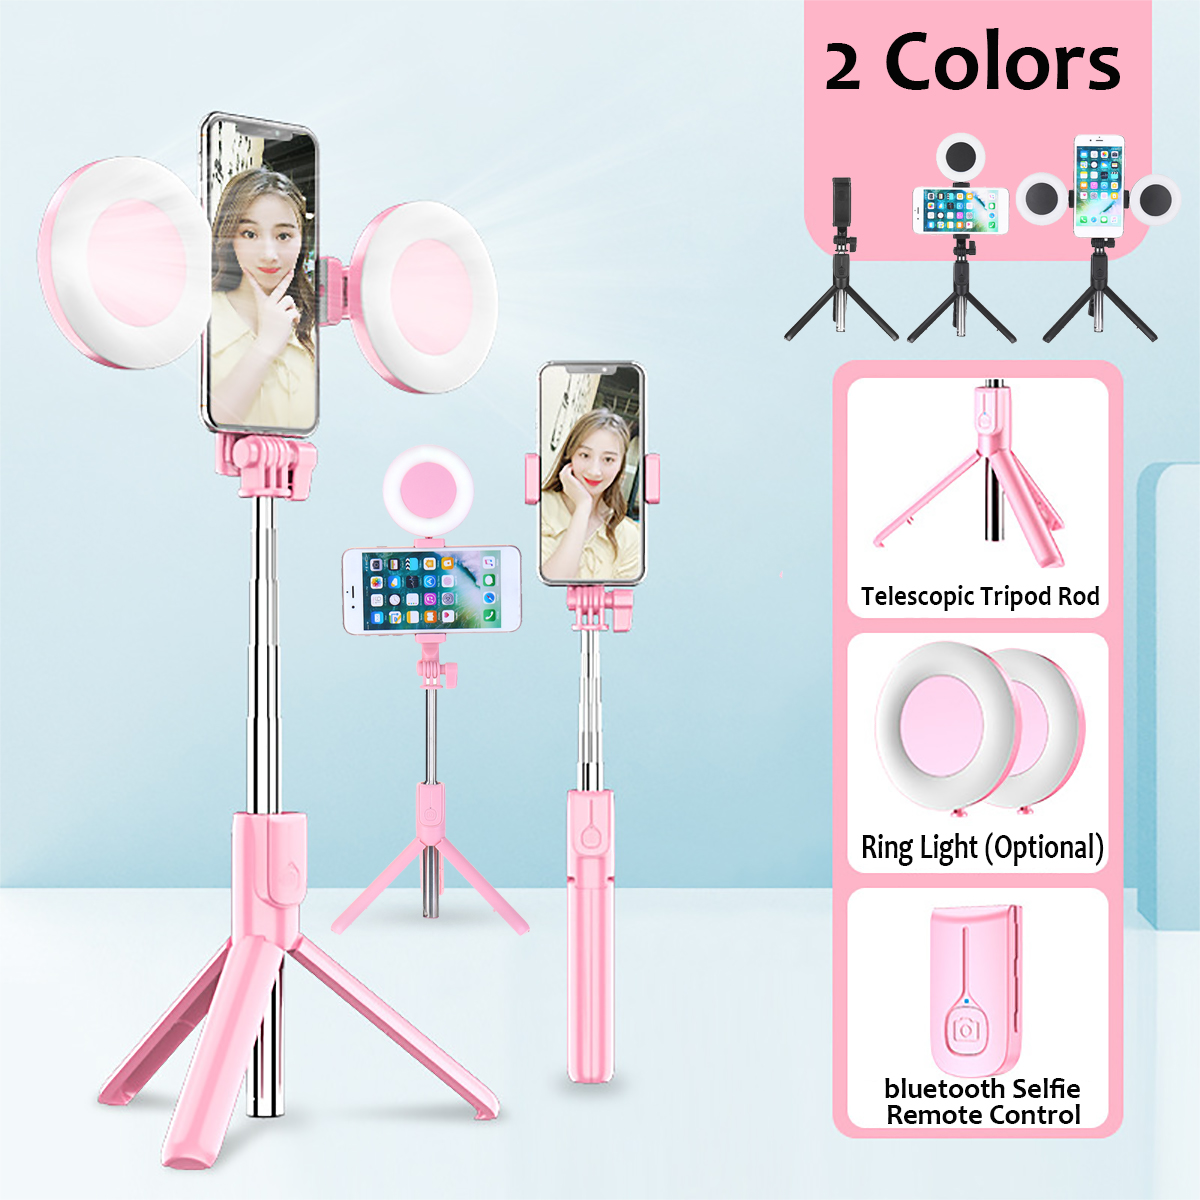 Telescopic-Fill-Light-Multifunctional-bluetooth-Selfie-Stick-Tripod-Outdoor-Mobile-Phone-Photography-1760893-2